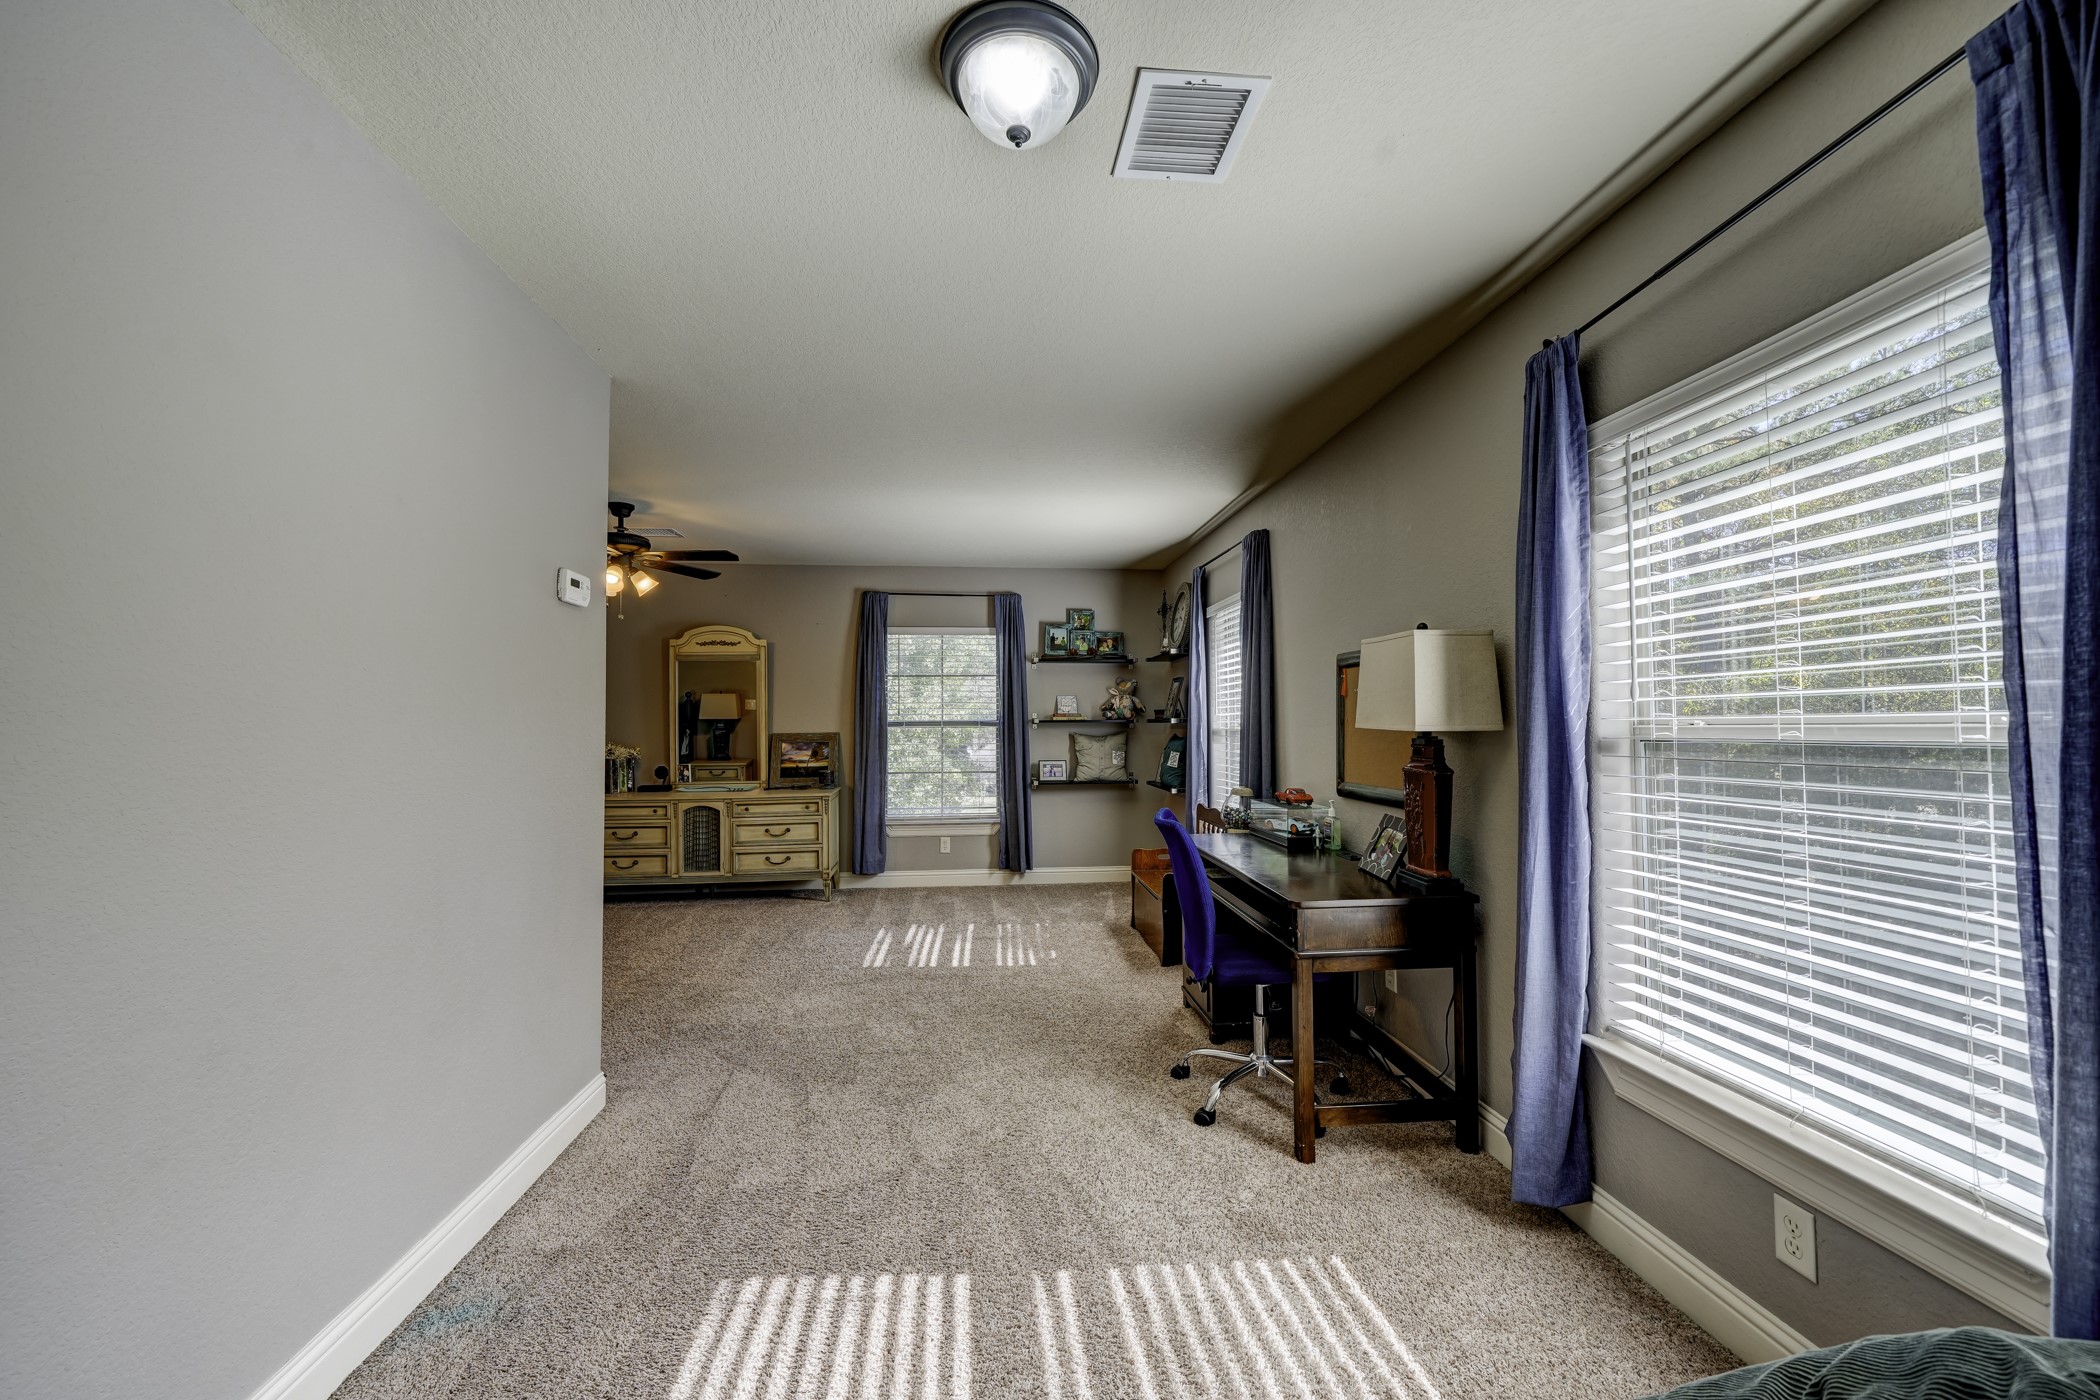 Another view of this incredible space! There's room for an amazing game room with space for pool table and gaming area OR create a teenager's dream bedroom!